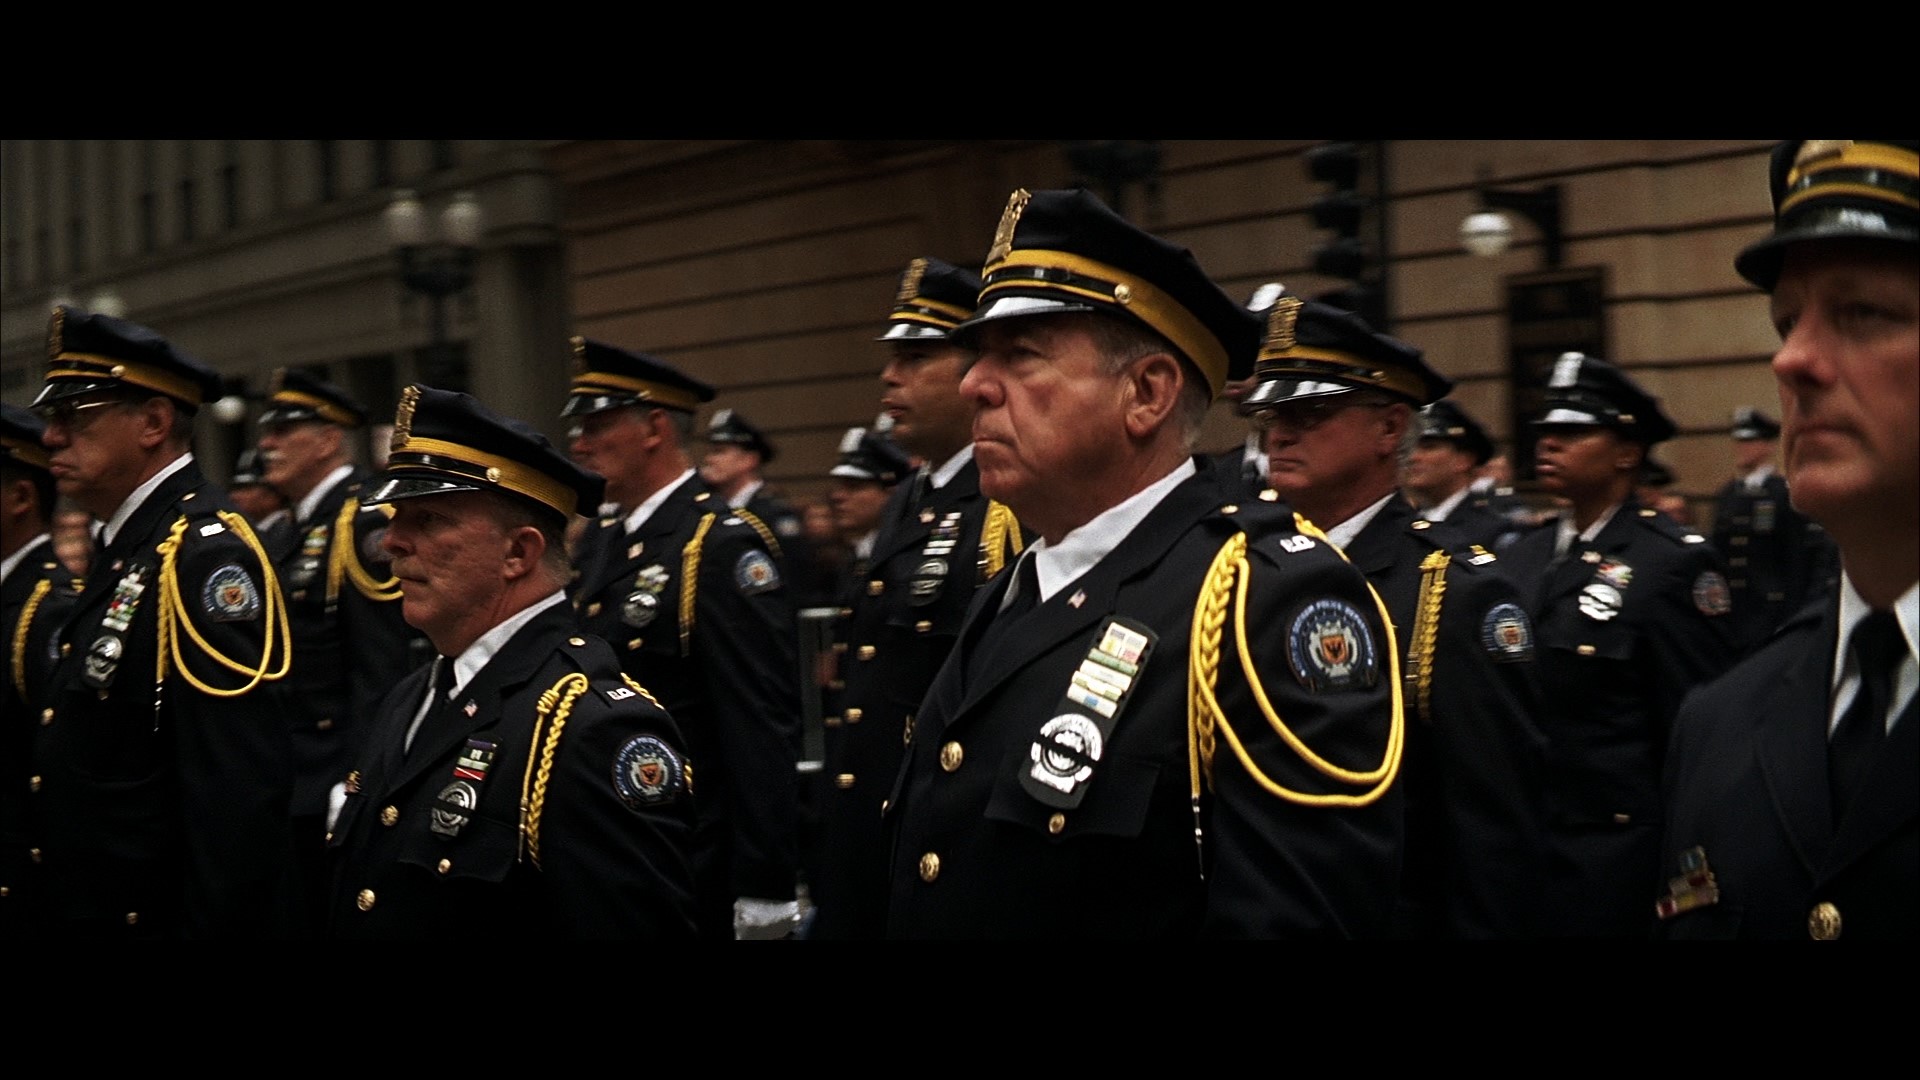 THE DARK KNIGHT (2008) - Gotham City Police Badge with Mourning Band and Ranking Bars - Image 11 of 11